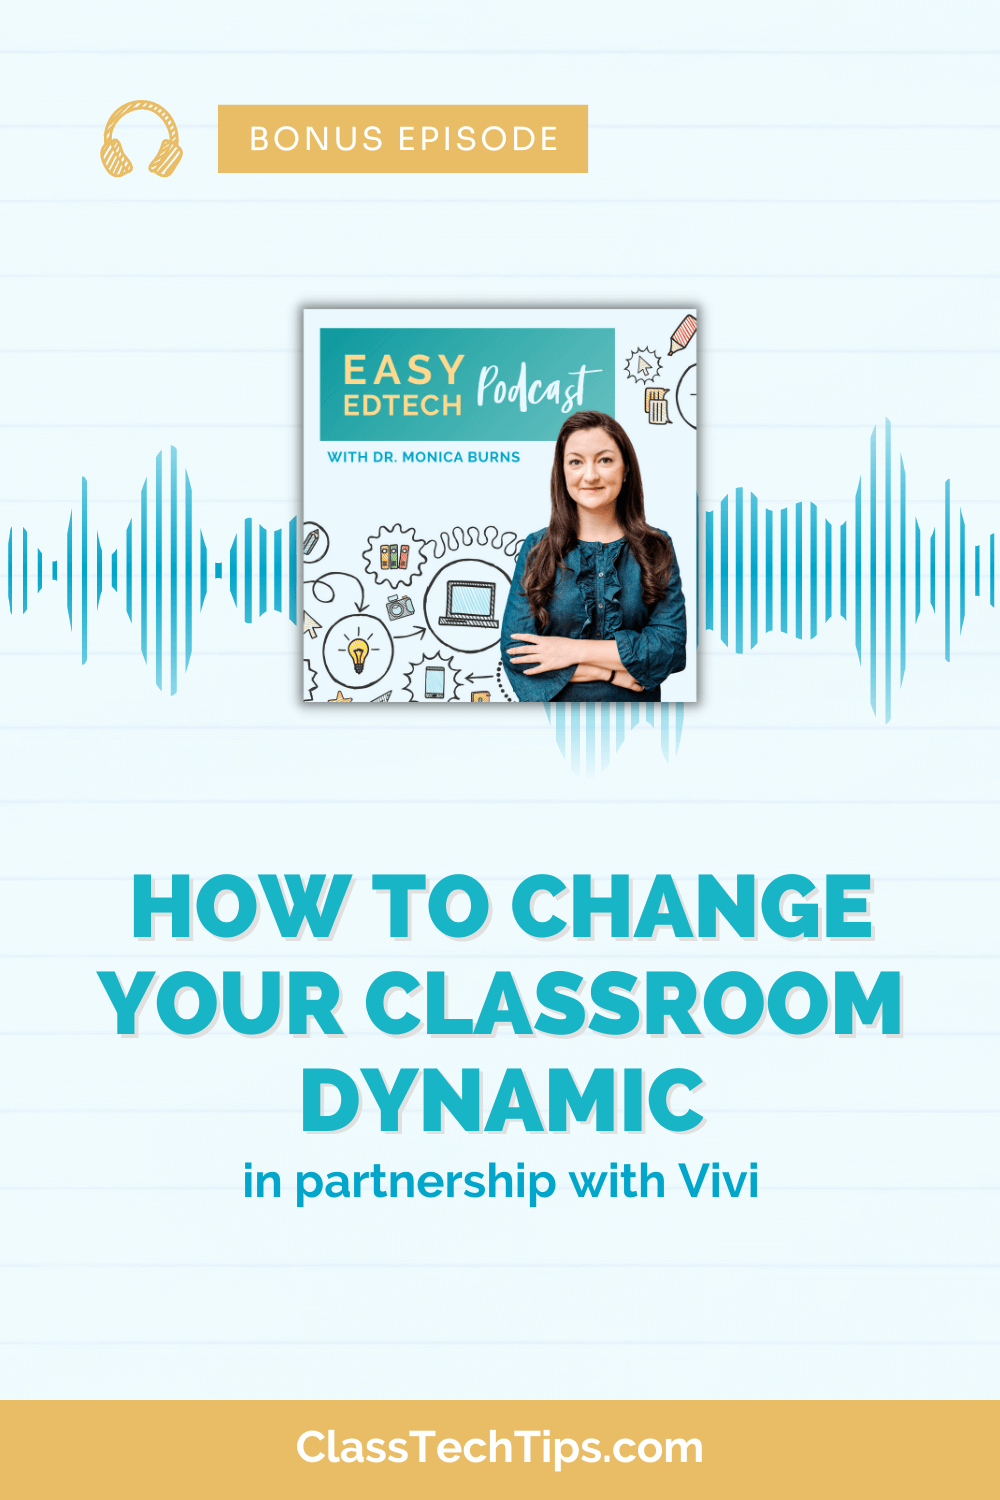 A visual for the Easy EdTech Podcast featuring Dr. Monica Burns. The image shows the title "How to Change Your Classroom Dynamic" for a bonus episode in collaboration with Vivi. Educational doodles surround the central image of the host against a light striped background.